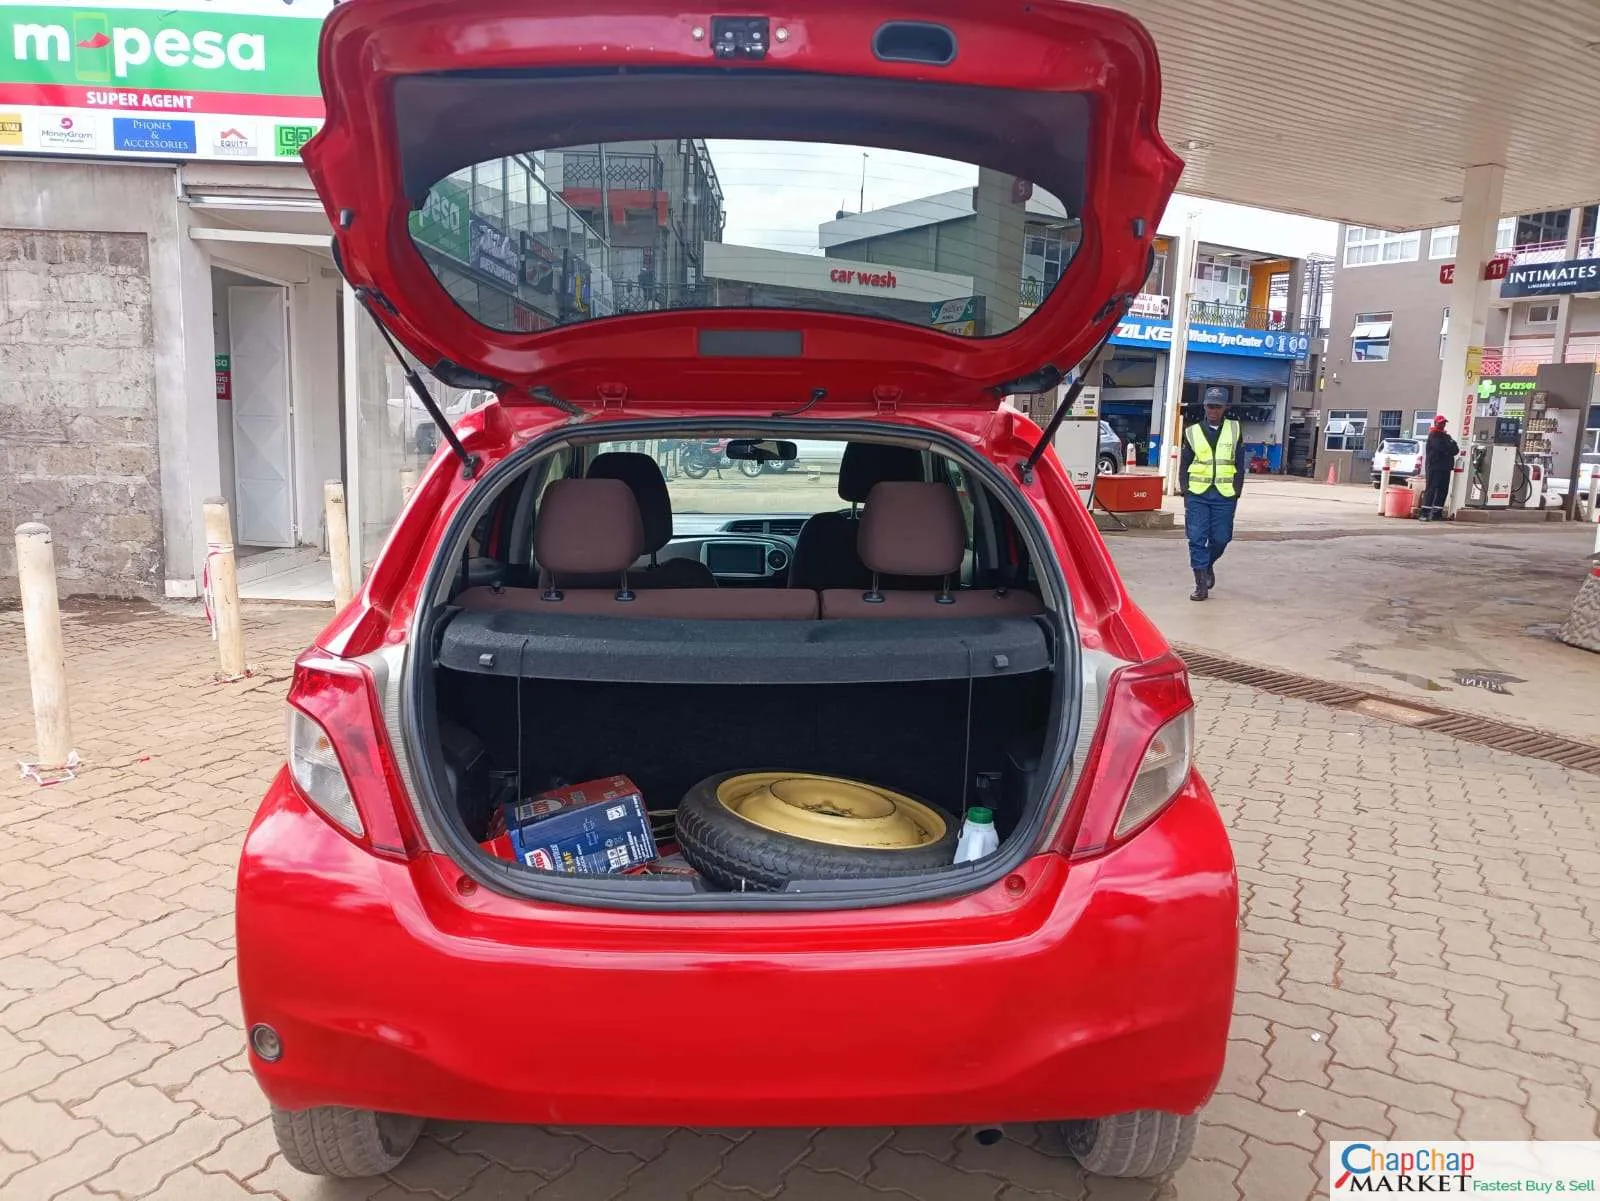 Cars Cars For Sale-Toyota Vitz for sale in Kenya 1300cc You Pay 30% Deposit Trade in OK EXCLUSIVE Hire Purchase Installments bank finance ok 8